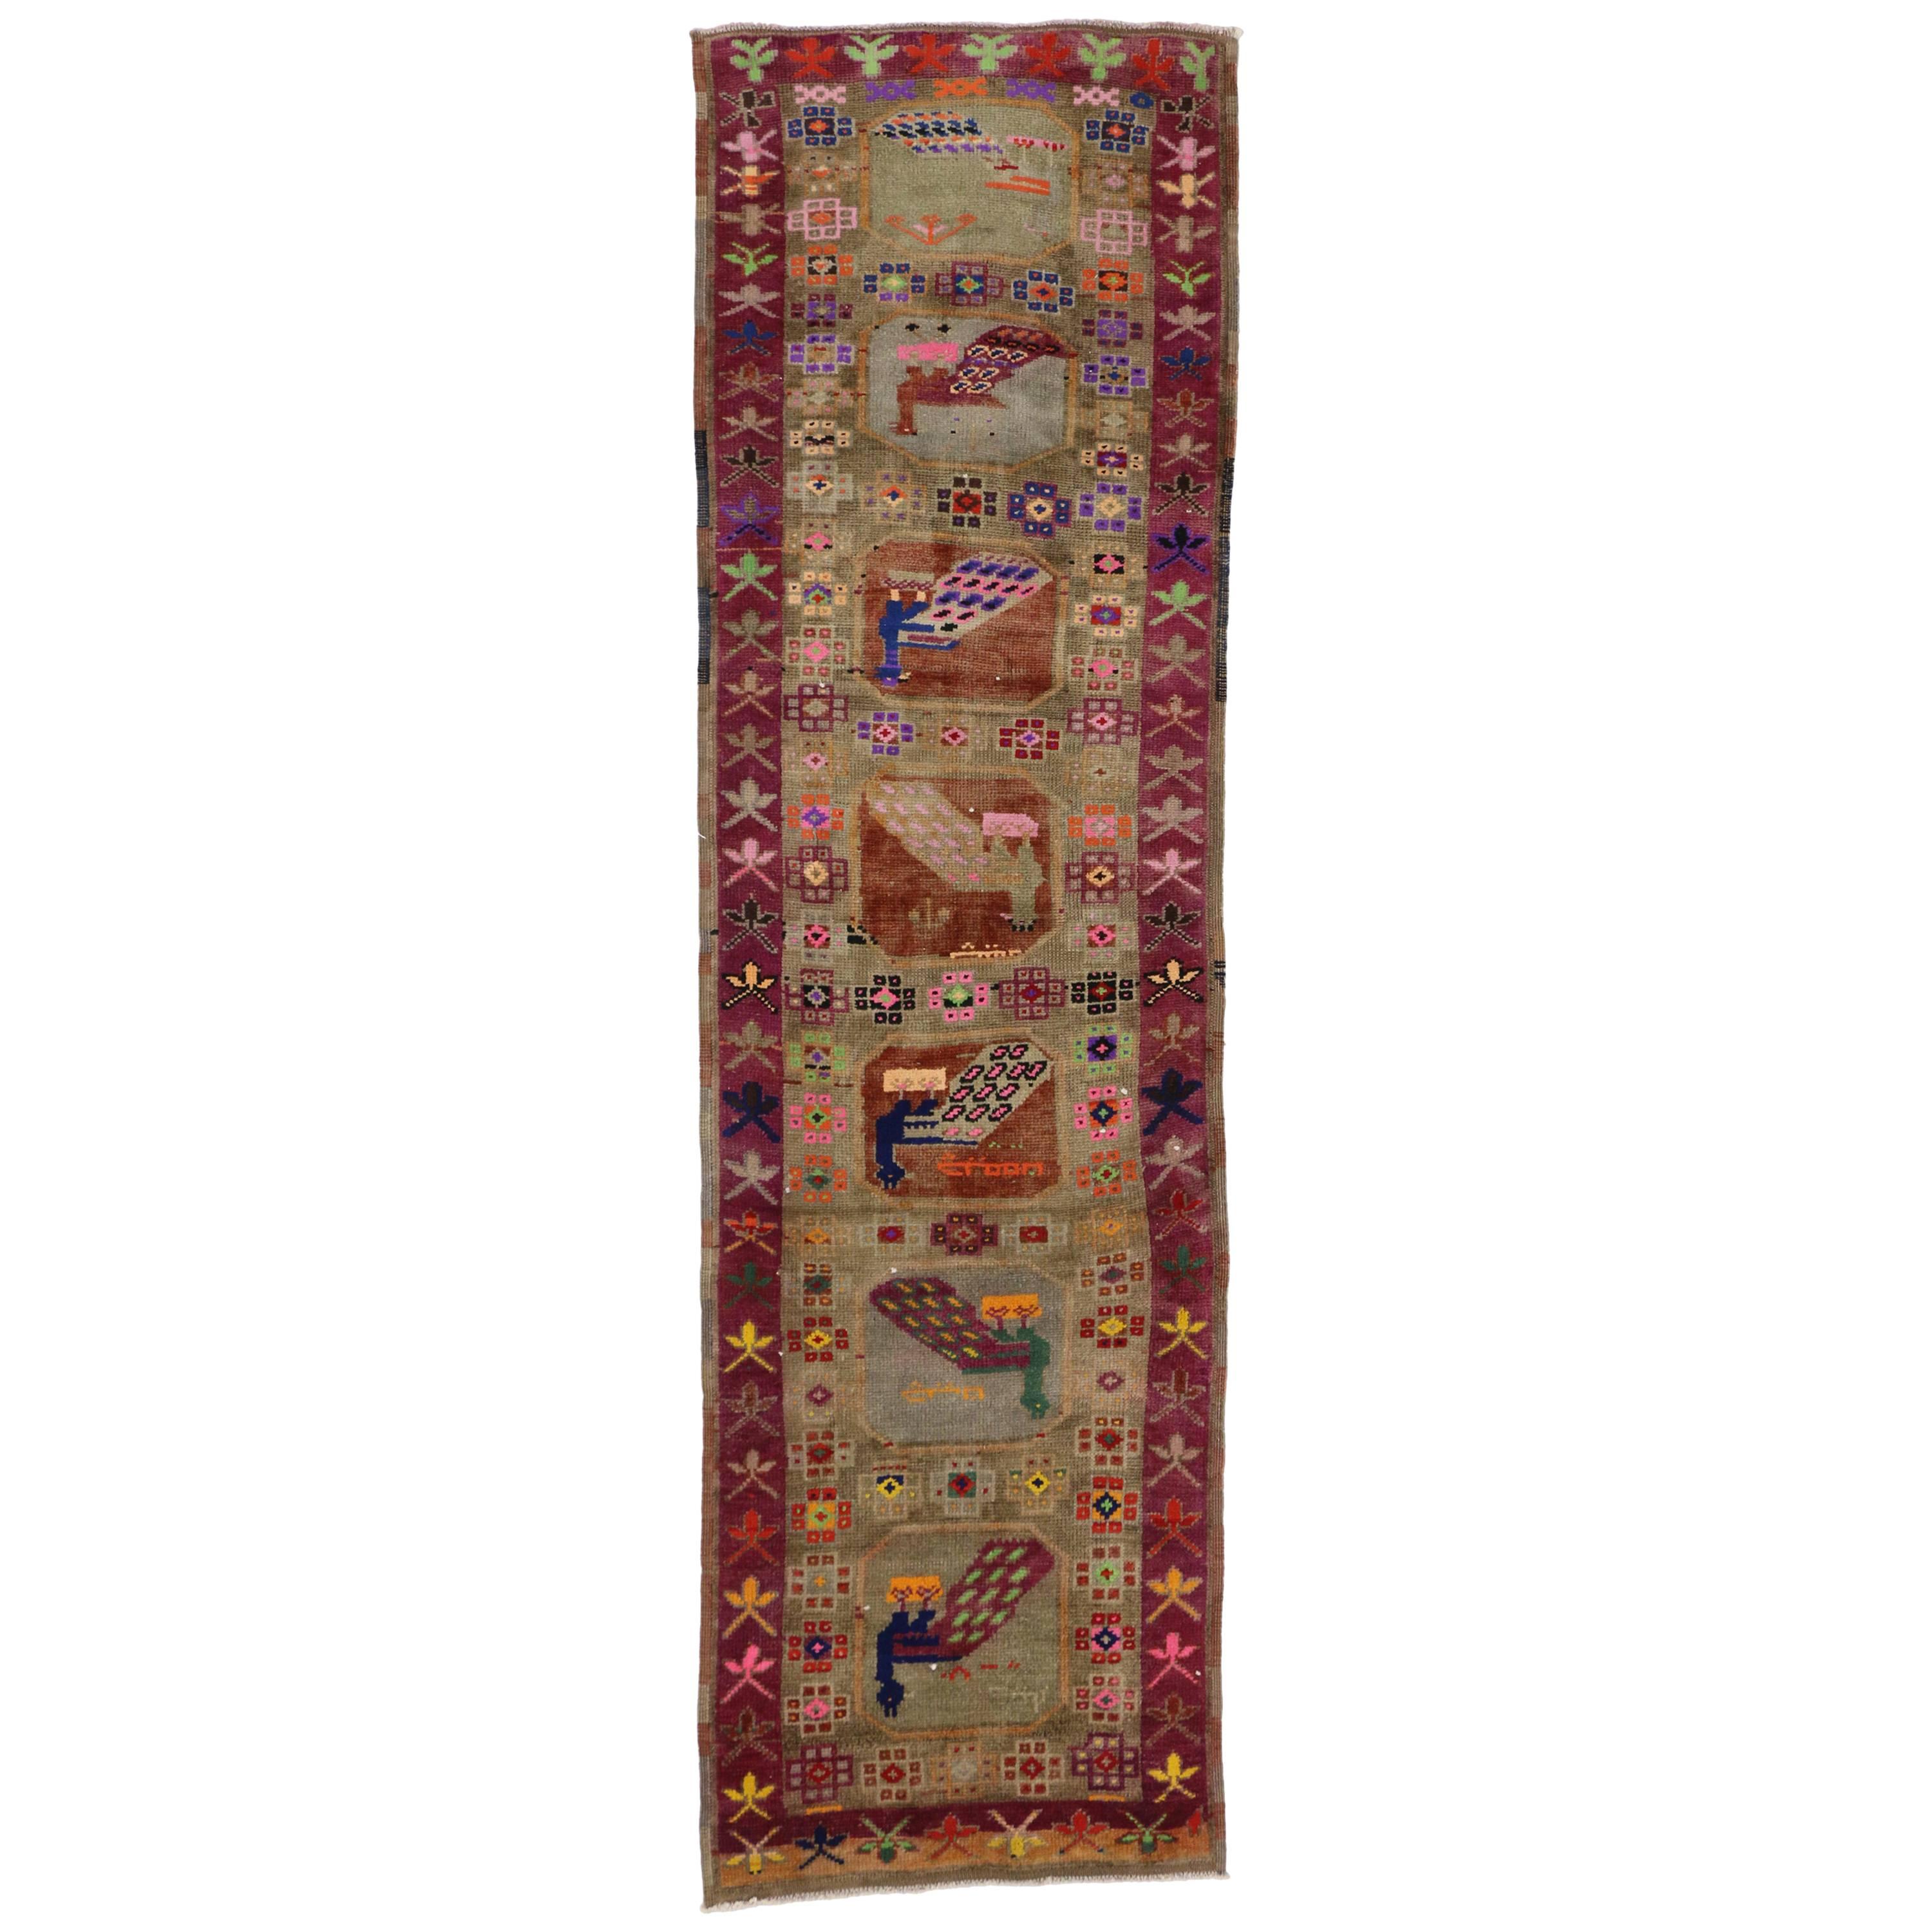 Vintage Turkish Oushak Runner with Tribal Style and Peacock Motifs